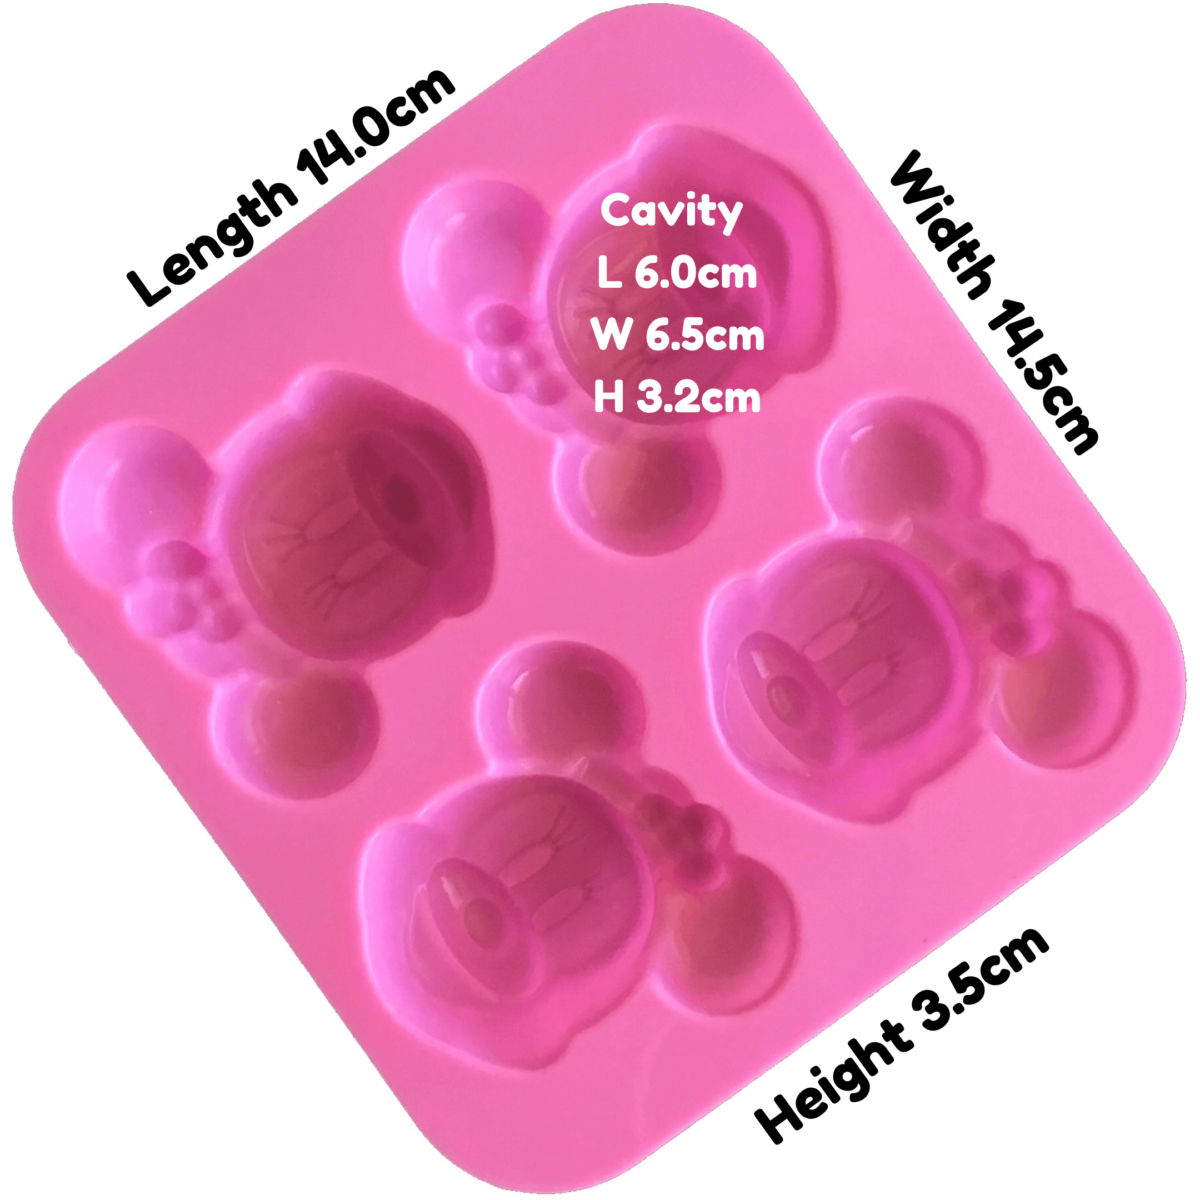 written dimensions of pink four cavity silicone mould with identical minnie mouse cavites